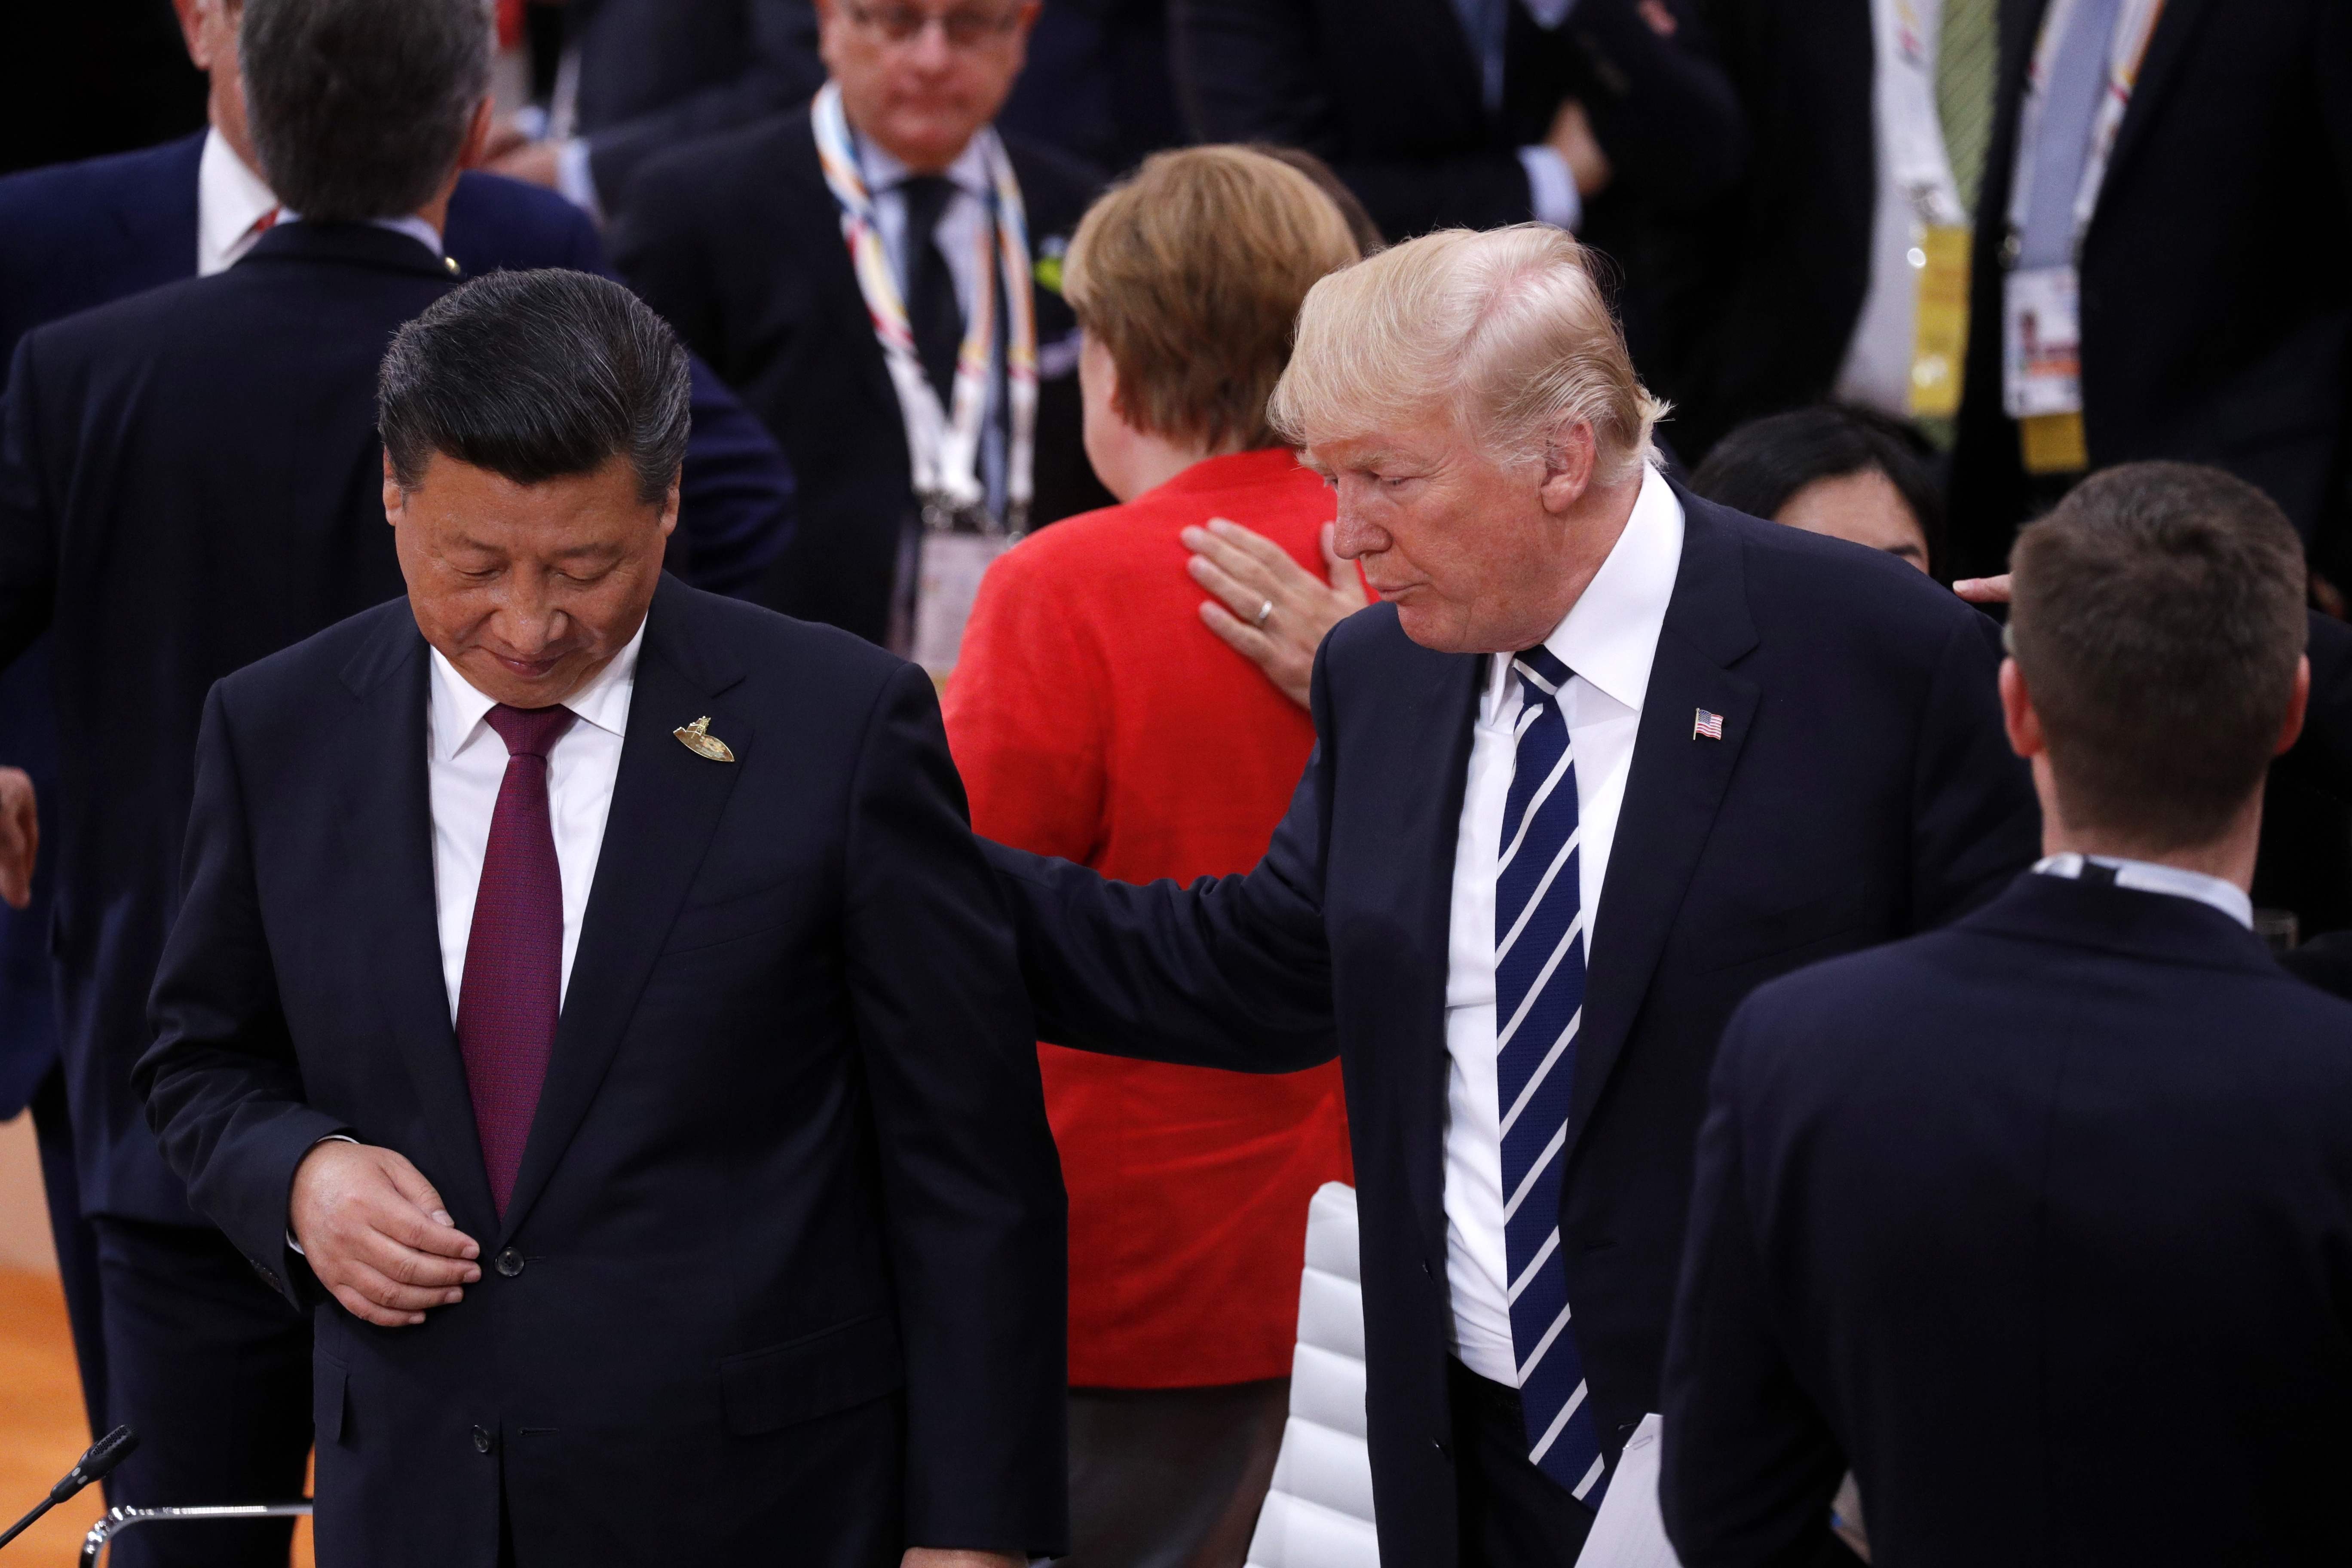 President Xi Jinping and US President Donald Trump at the G20 summit in Hamburg, on July 7. With Trump renouncing US leadership on climate change, the stage is set for China. Photo: AFP